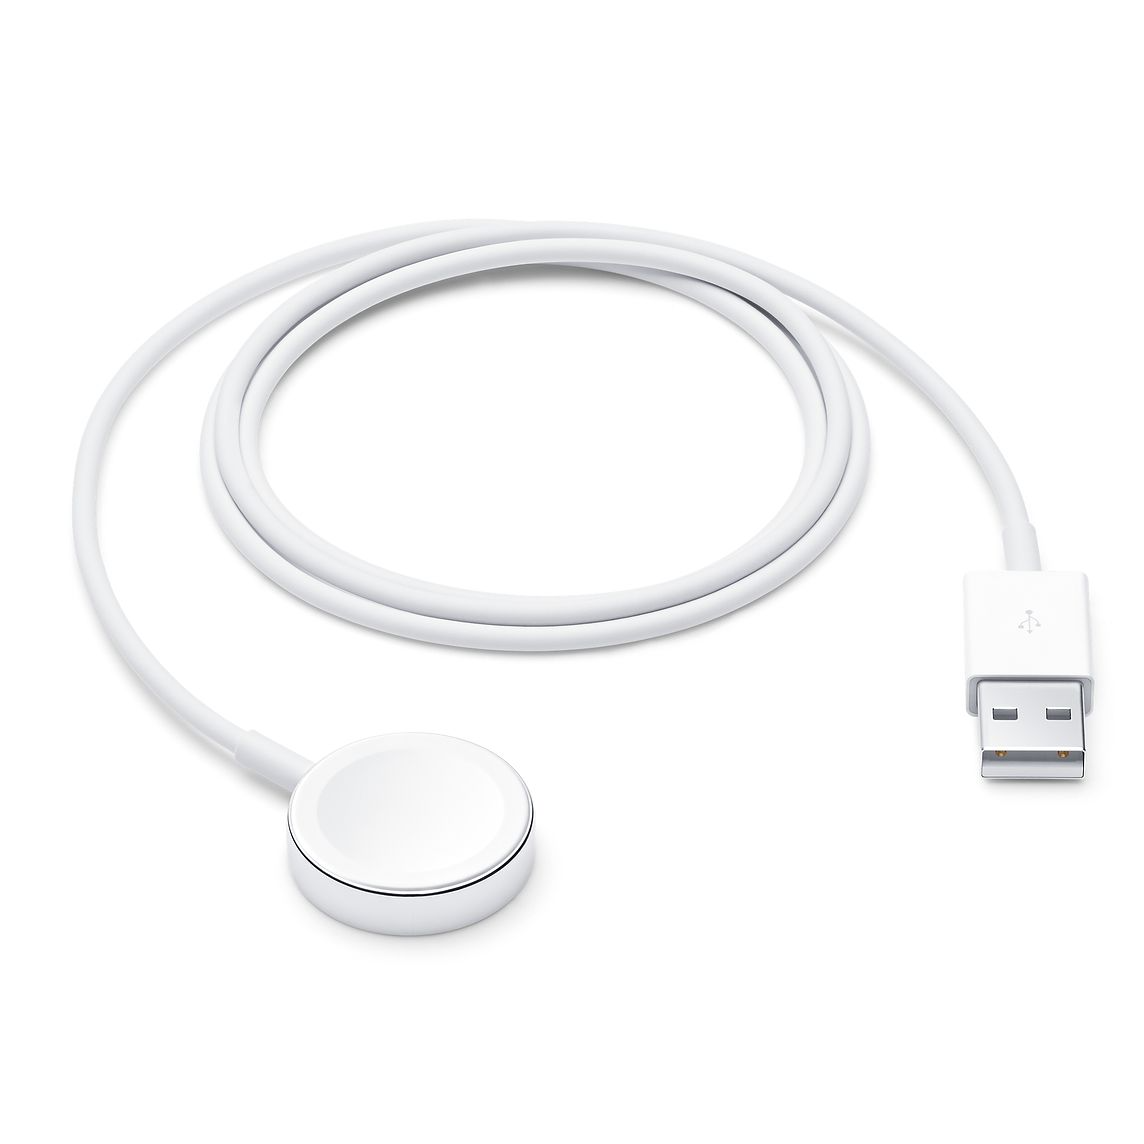 Apple Magnetic Charging Cable for Apple Watch - A1570 (MKLG2GH/A)-The Refurbished Apple Store